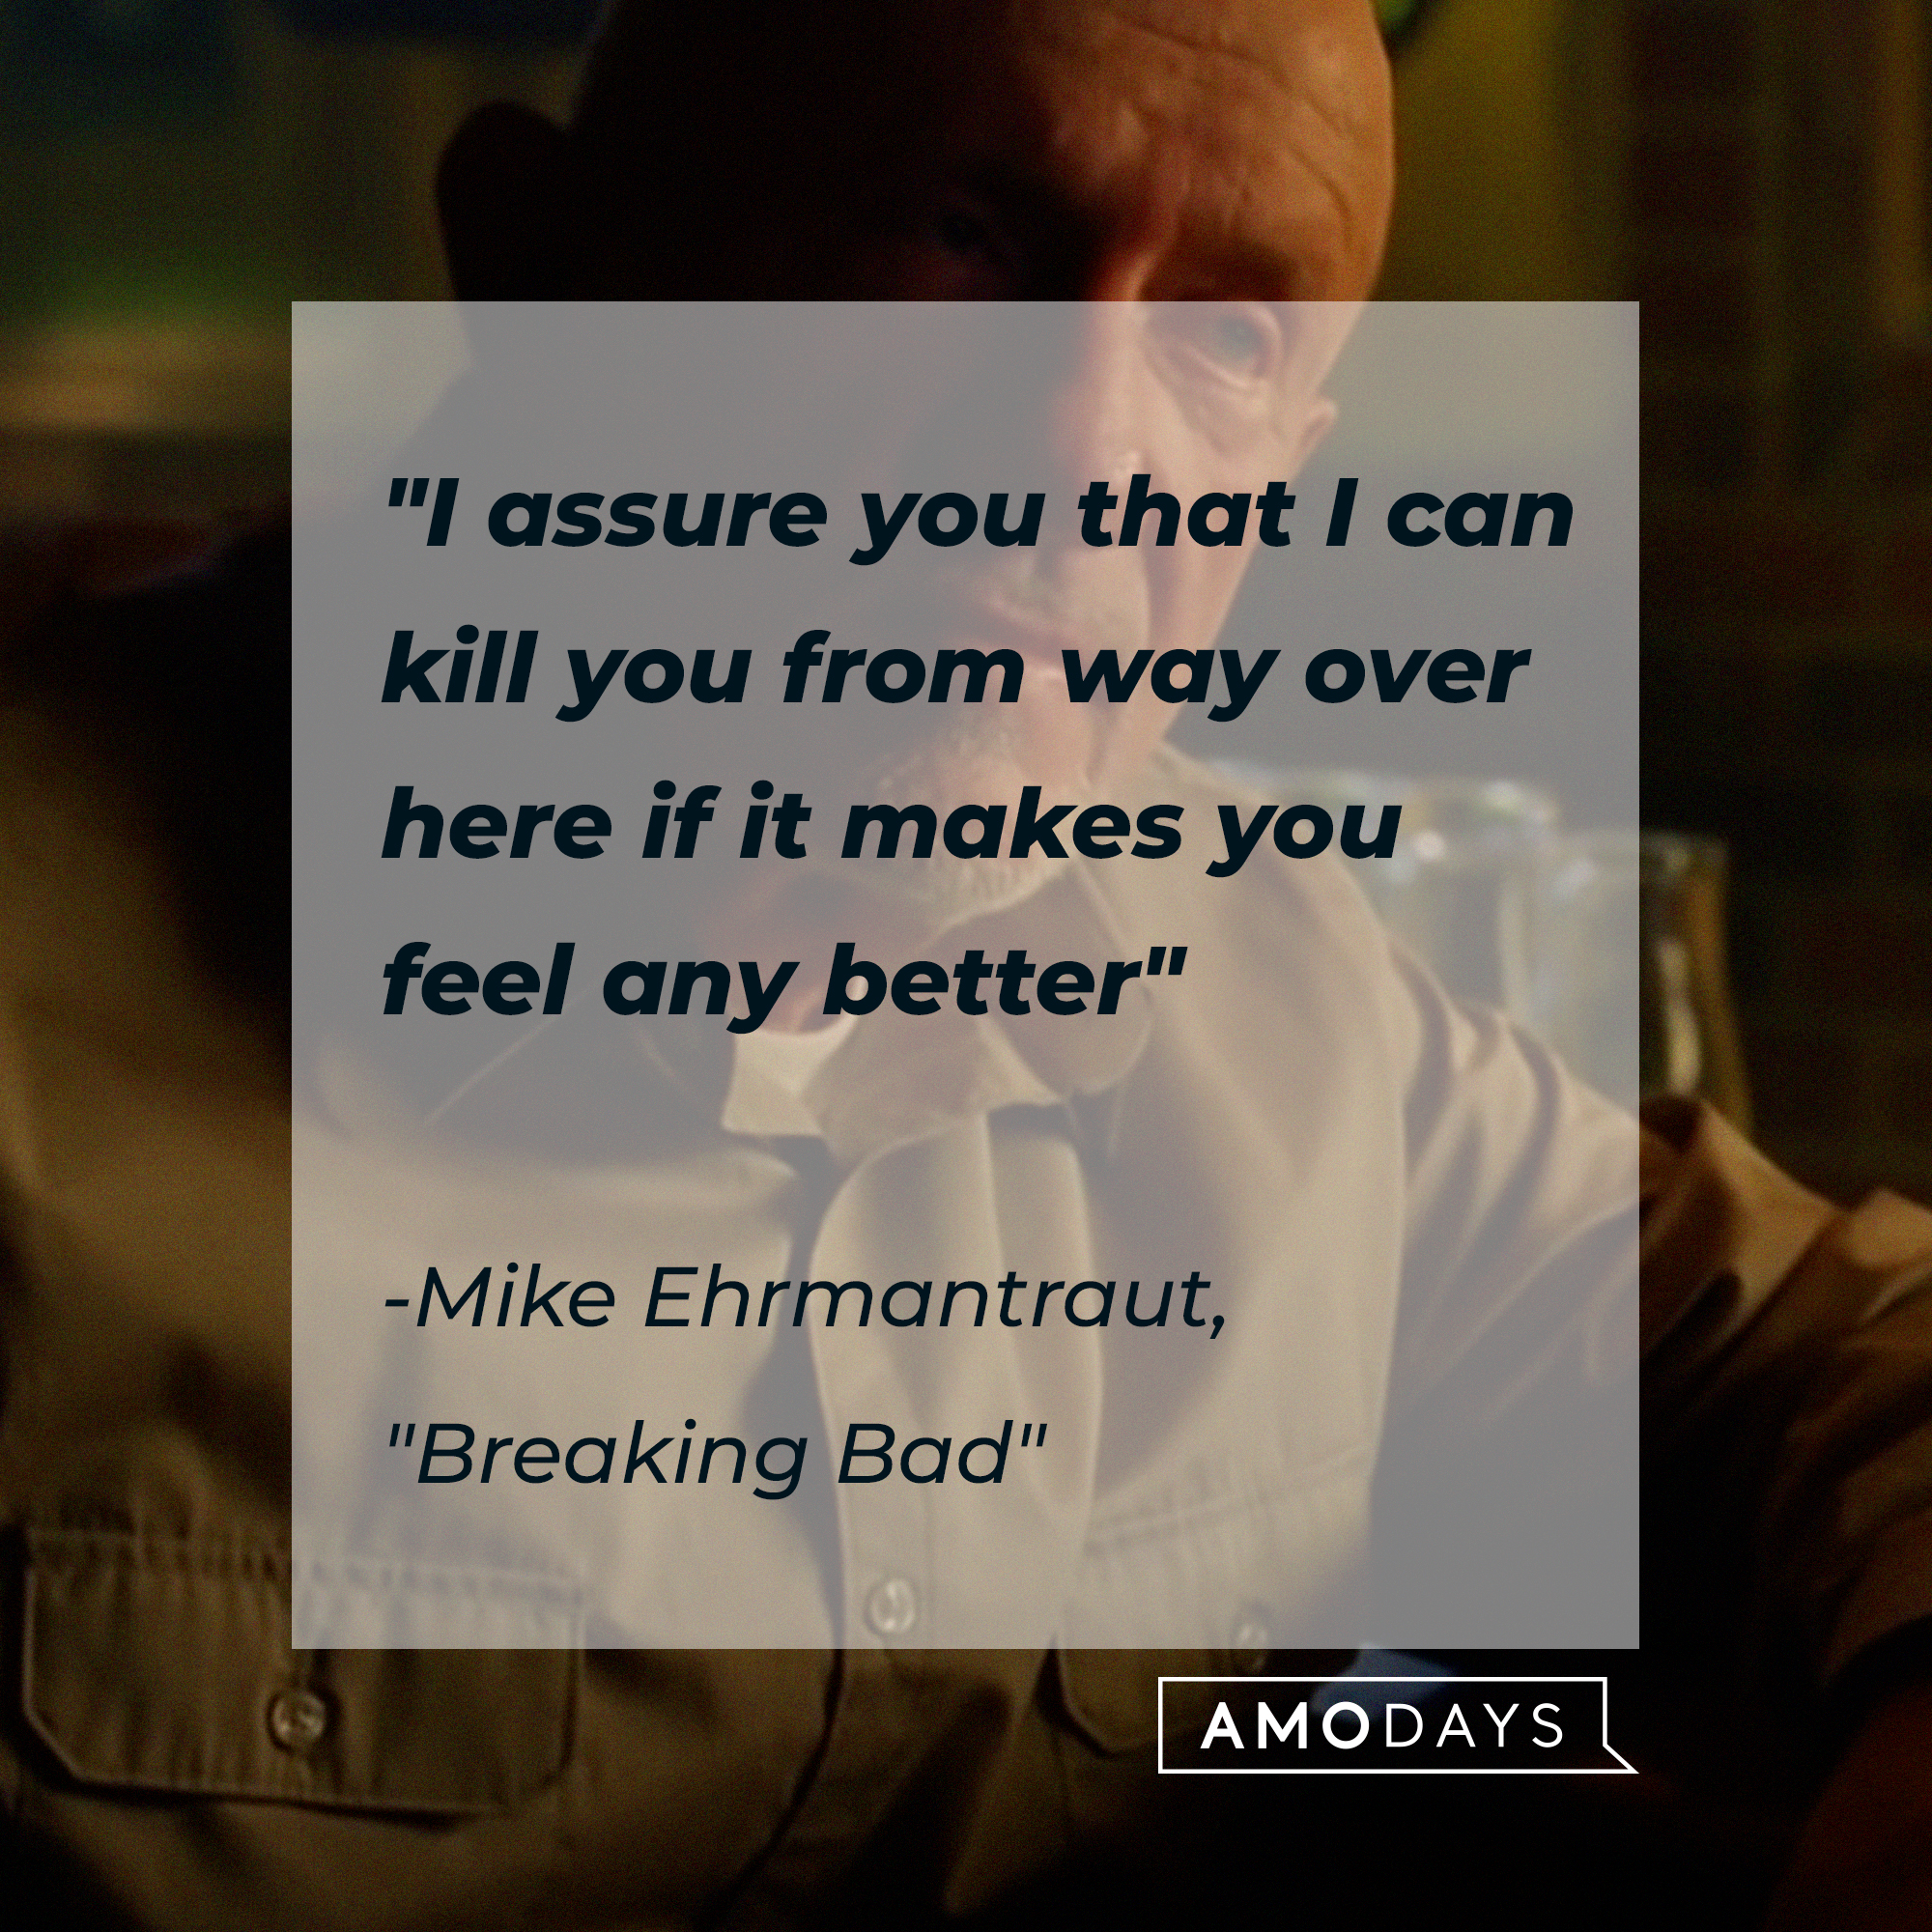 Mike Ehrmantraut with his quote, "I assure you that I can kill you from way over here if it makes you feel any better." | Source: youtube.com/breakingbad